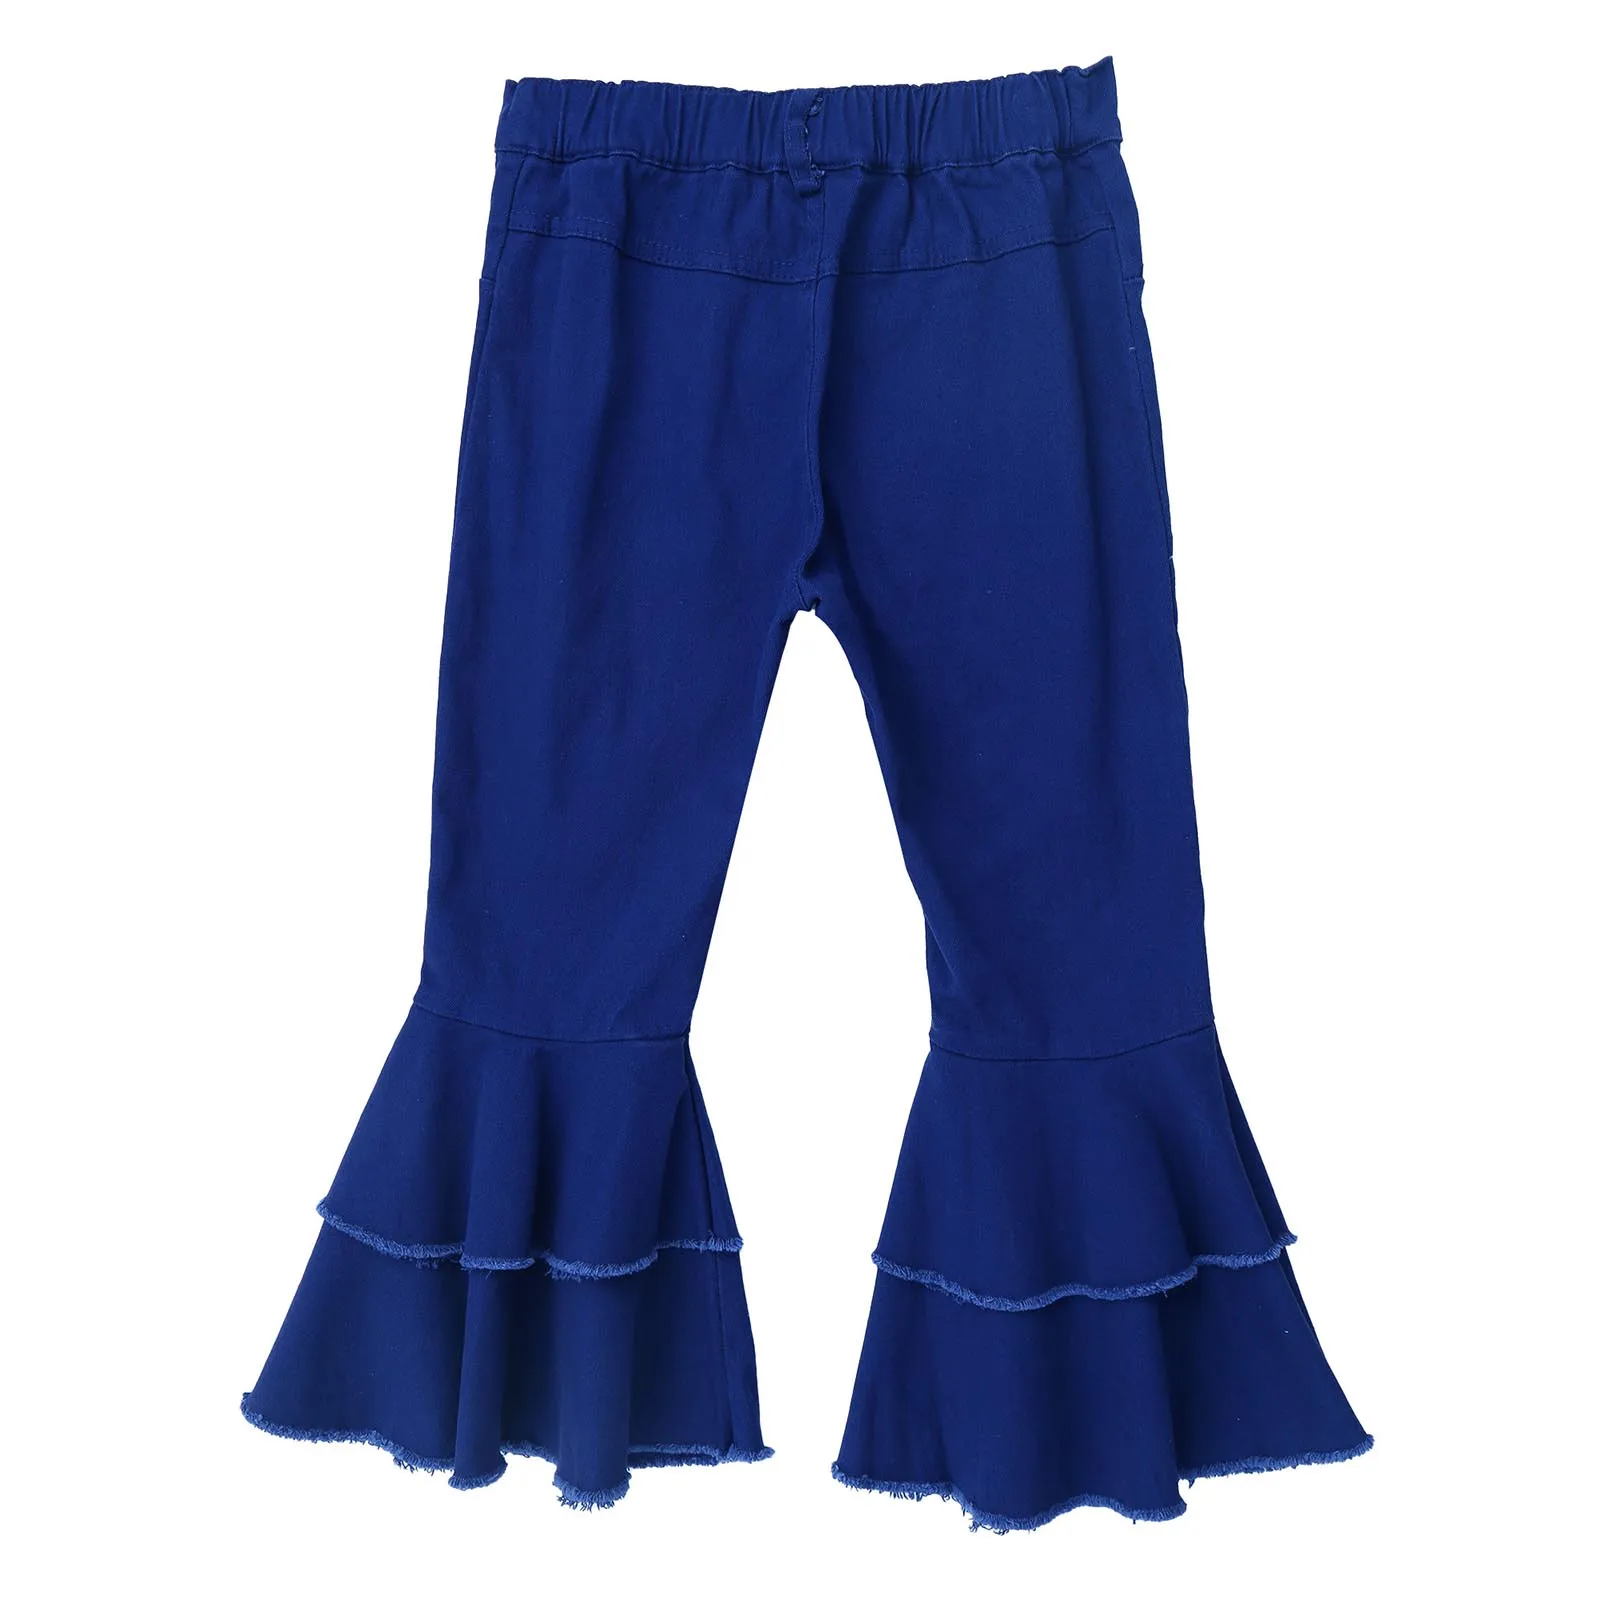 Trousers Kids Girls Children Fashion Casual Flares Pants Front Button ...